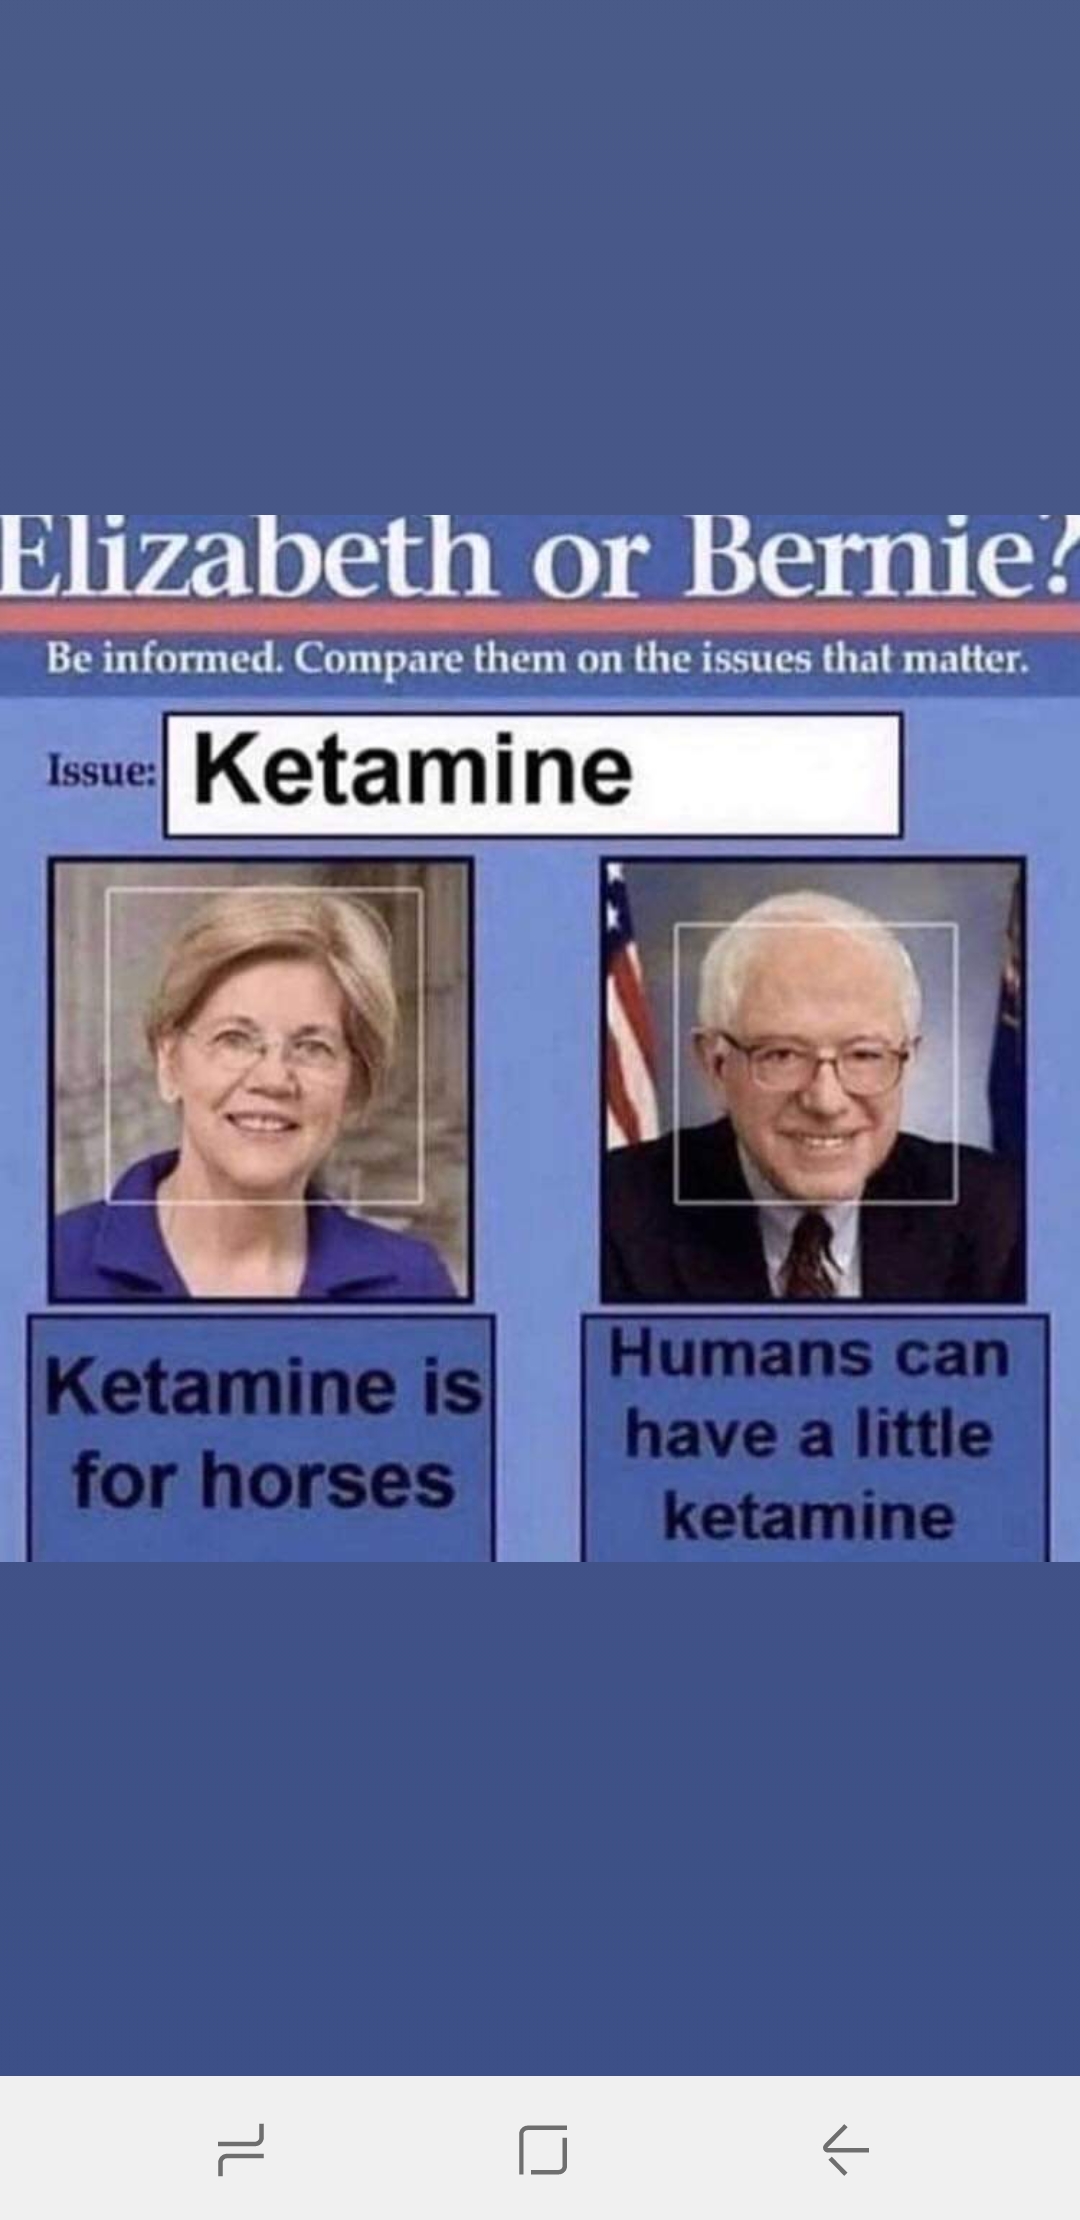 elizabeth or bernie meme - Elizabeth or Bernie! Be informed. Compare them on the issues that matter. Issue Ketamine Ketamine is for horses Humans can have a little ketamine